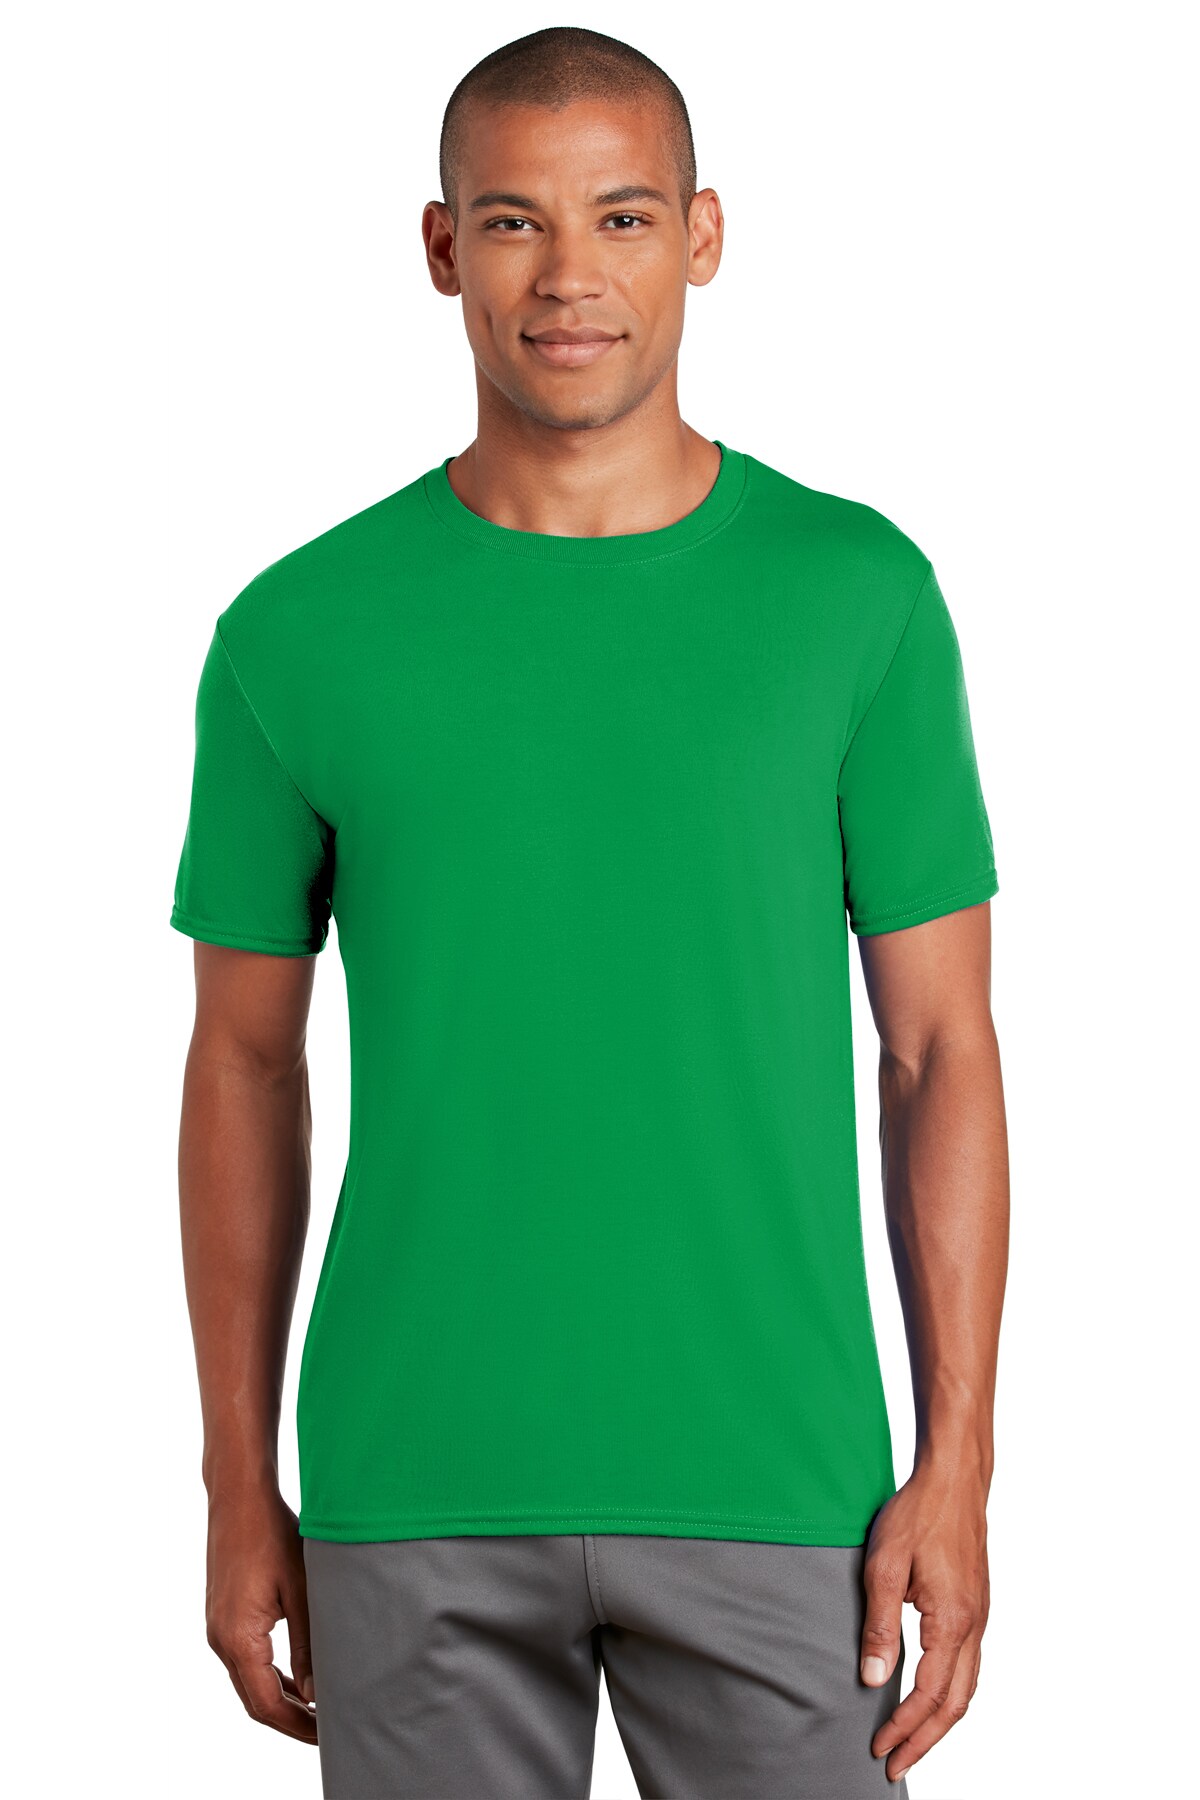 Best High-Quality T-Shirts  5-Oz, 100% Polyester Jersey Knit